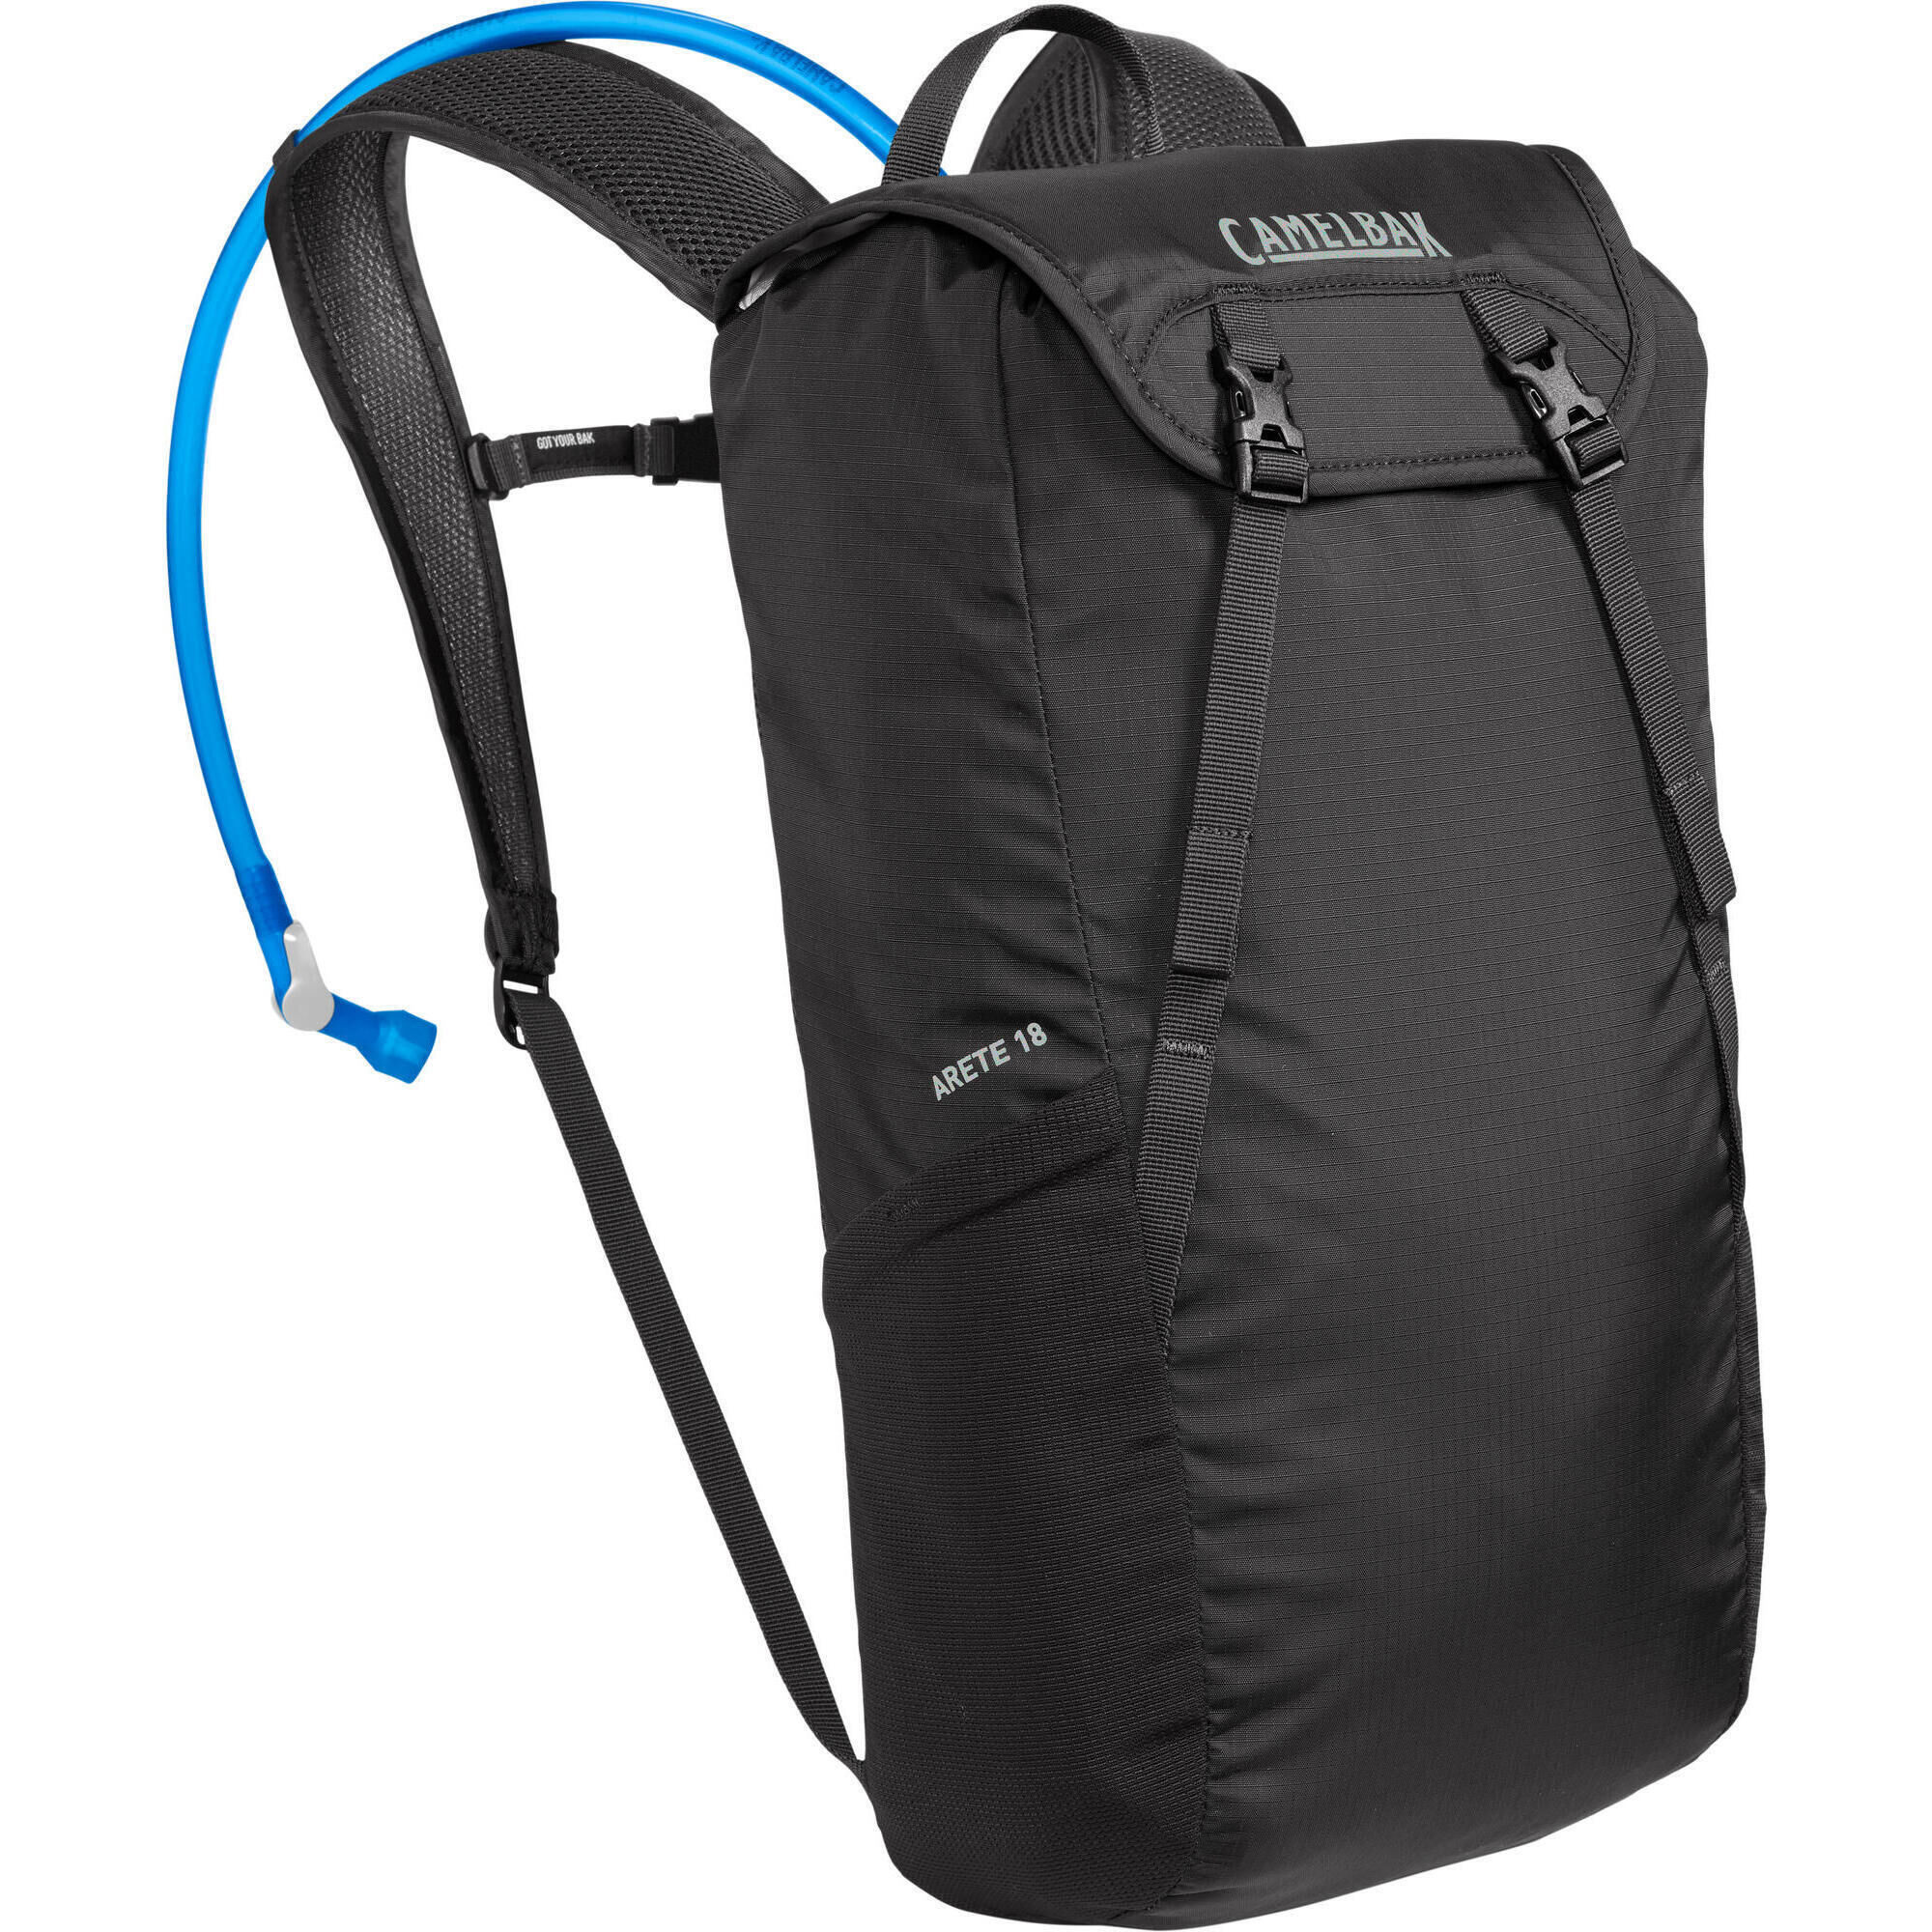 CAMELBAK Arete Hydration Pack 1 with Reservoir